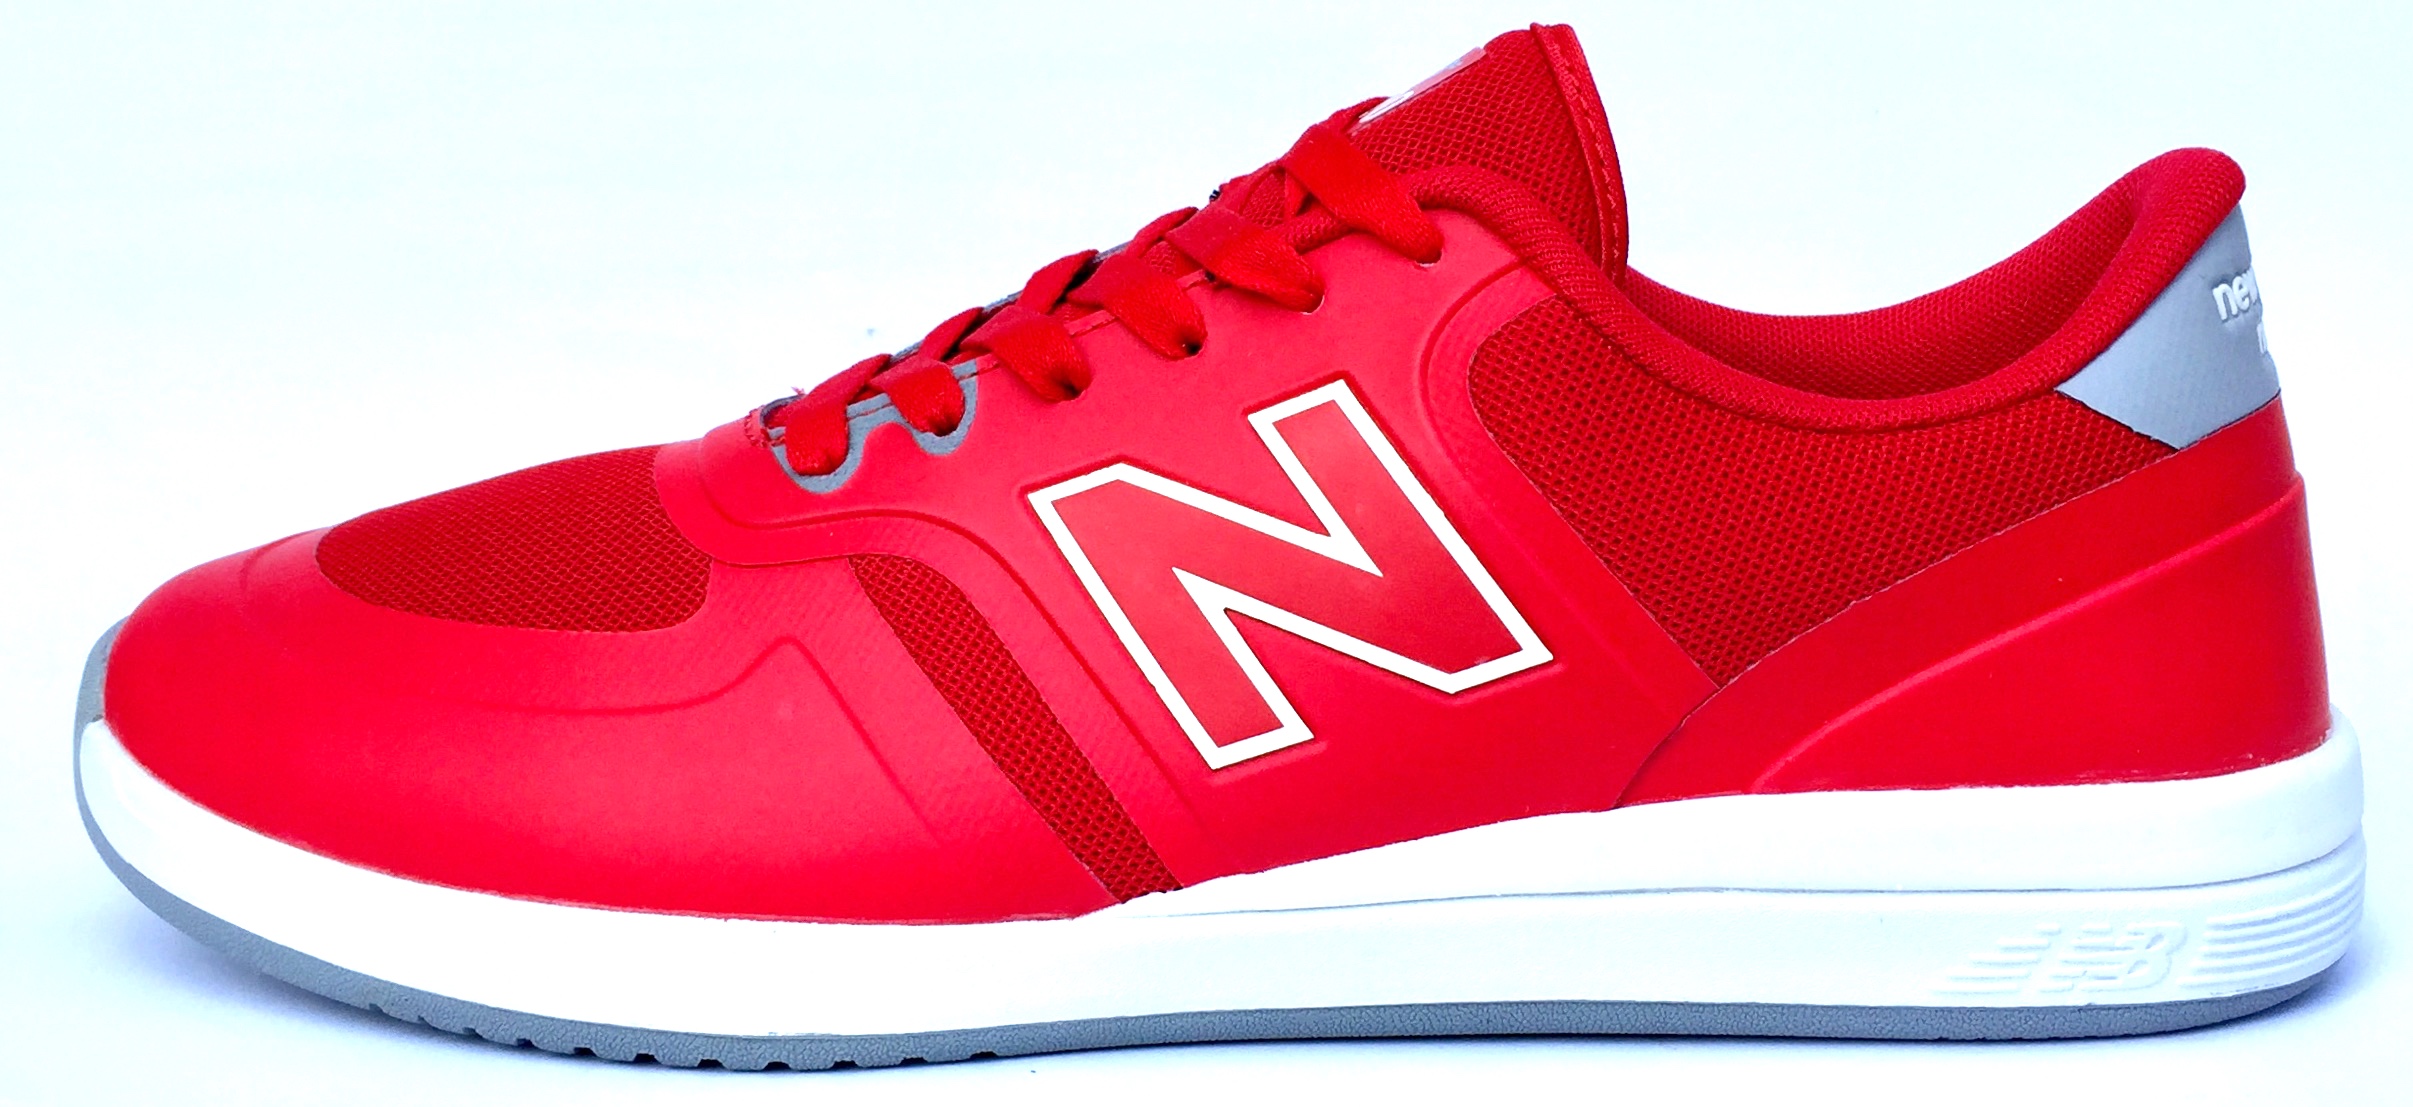 new balance 824 trainer review